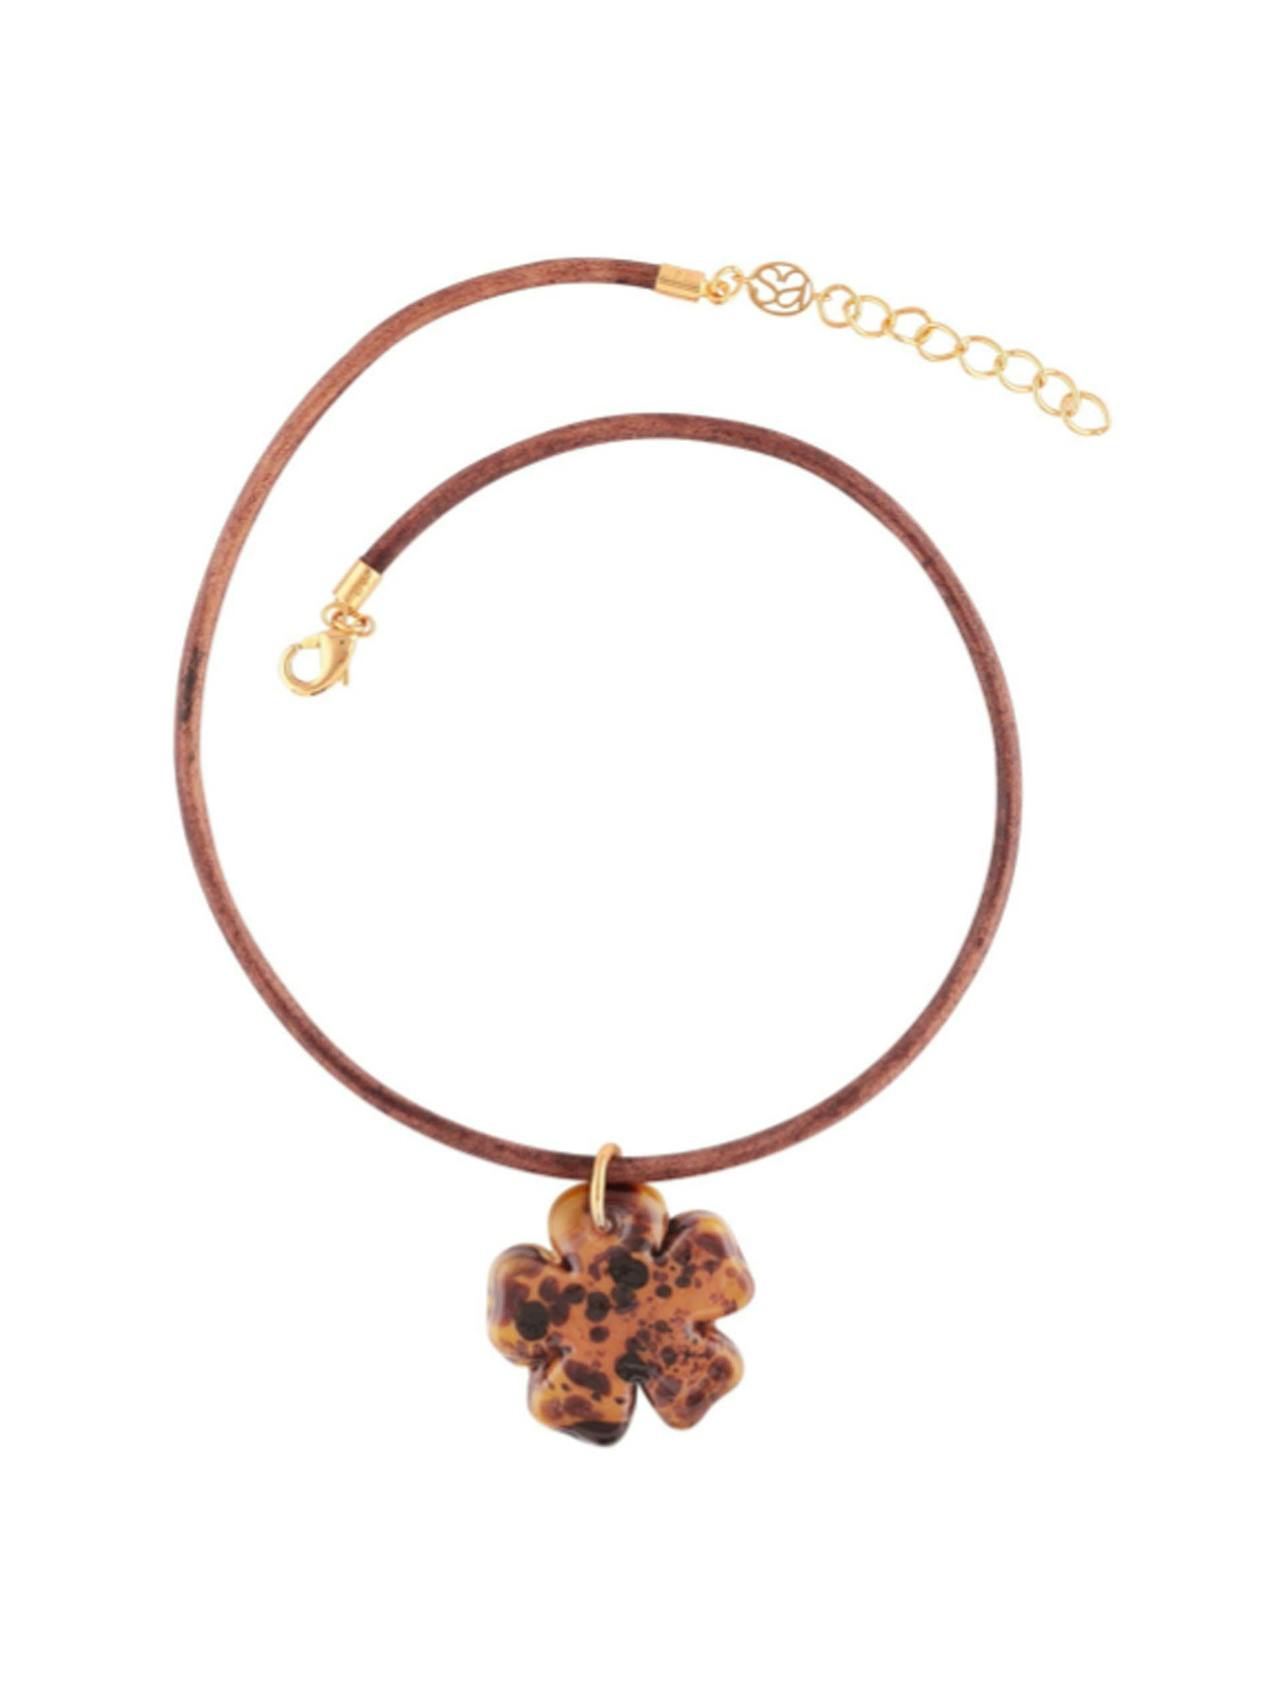 Mustard clover leather cord necklace